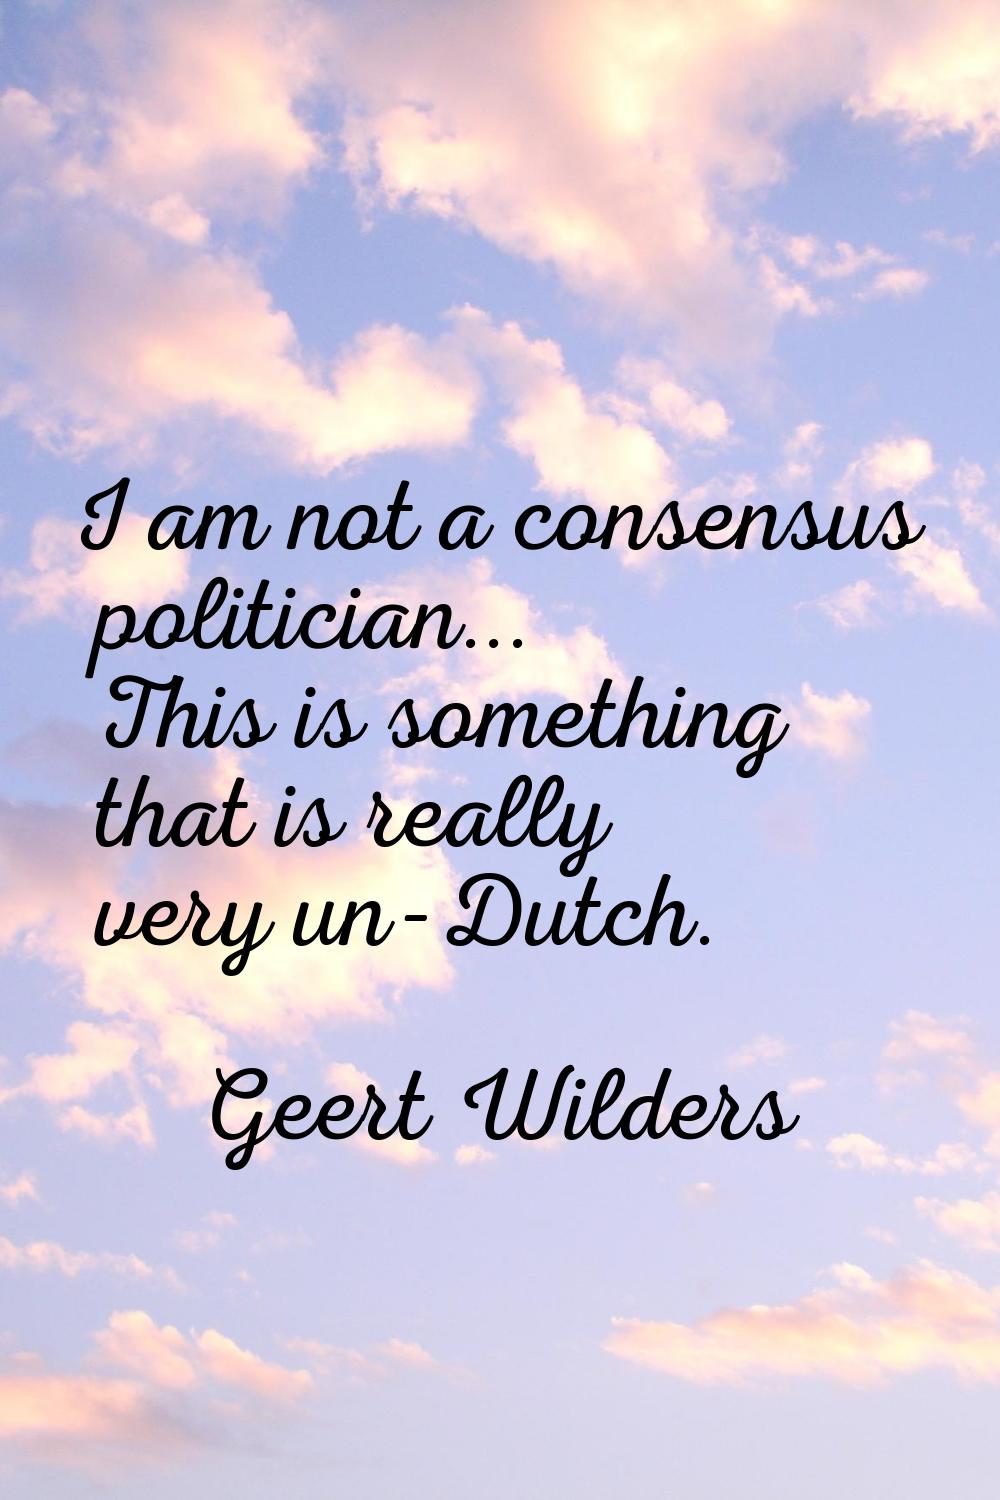 I am not a consensus politician... This is something that is really very un-Dutch.